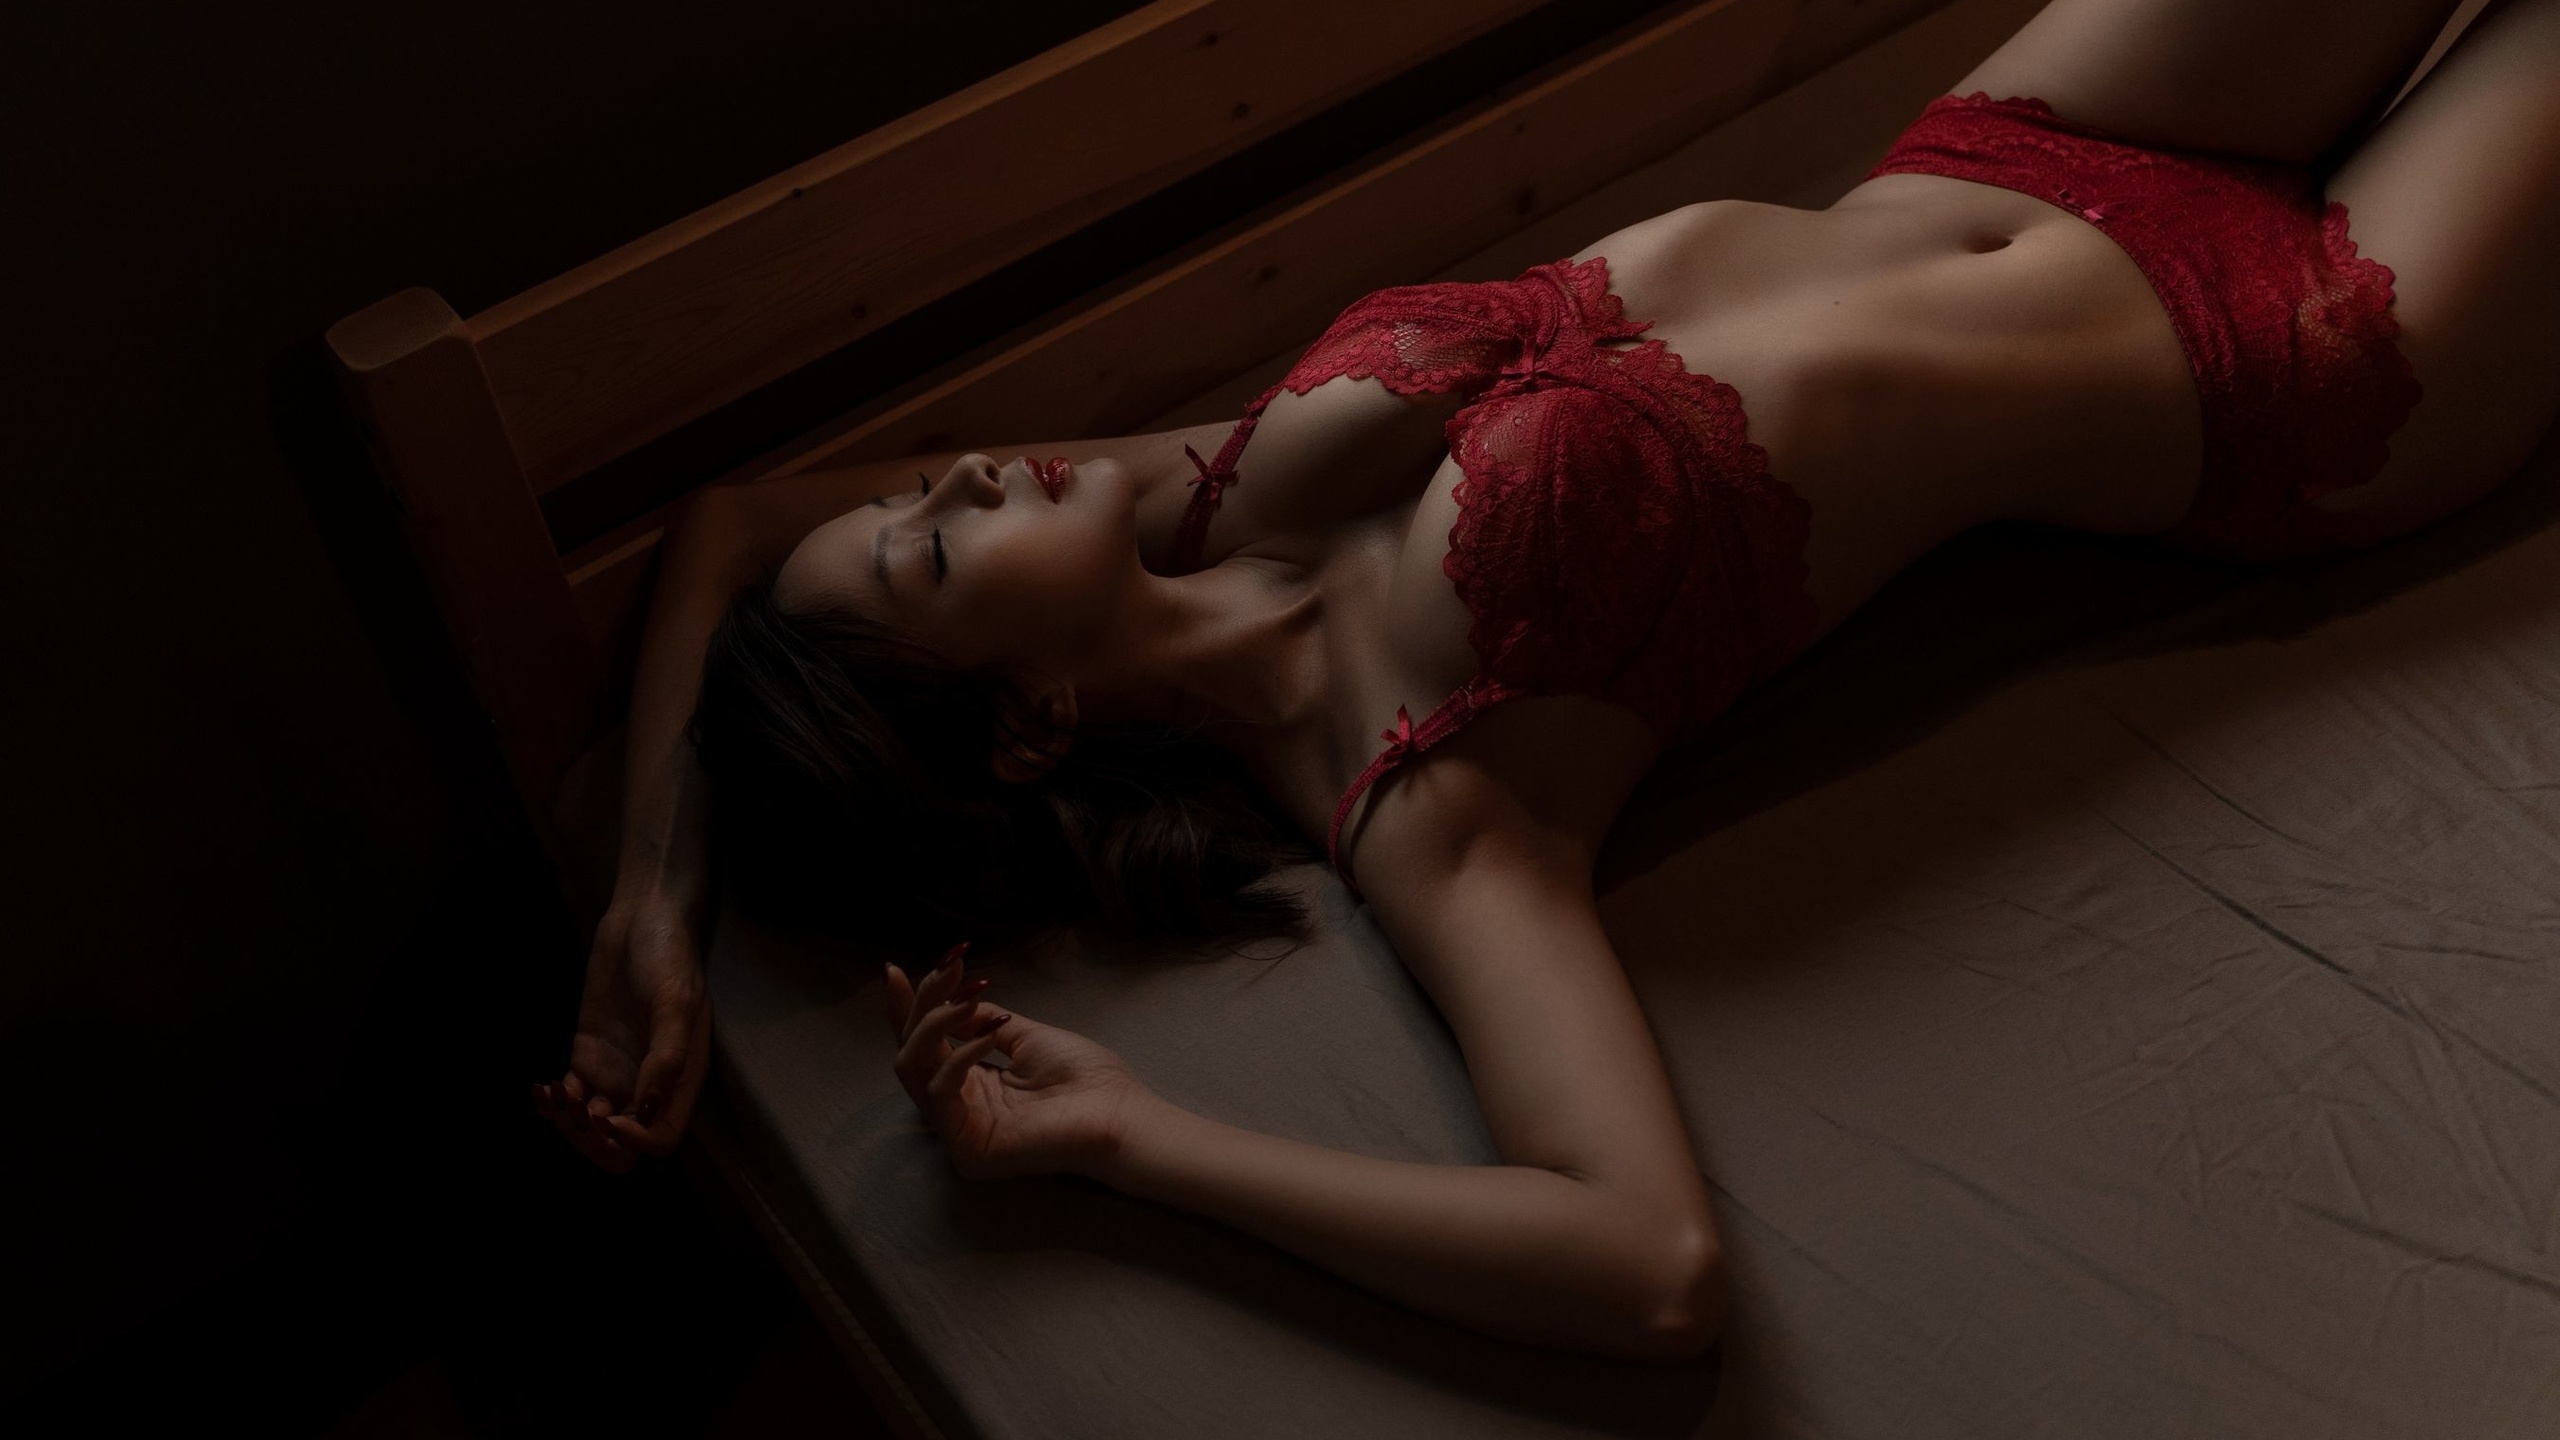 asian, women, model, brunette, women indoors, red bra, red panties, red lingerie, in bed, ass, closed eyes